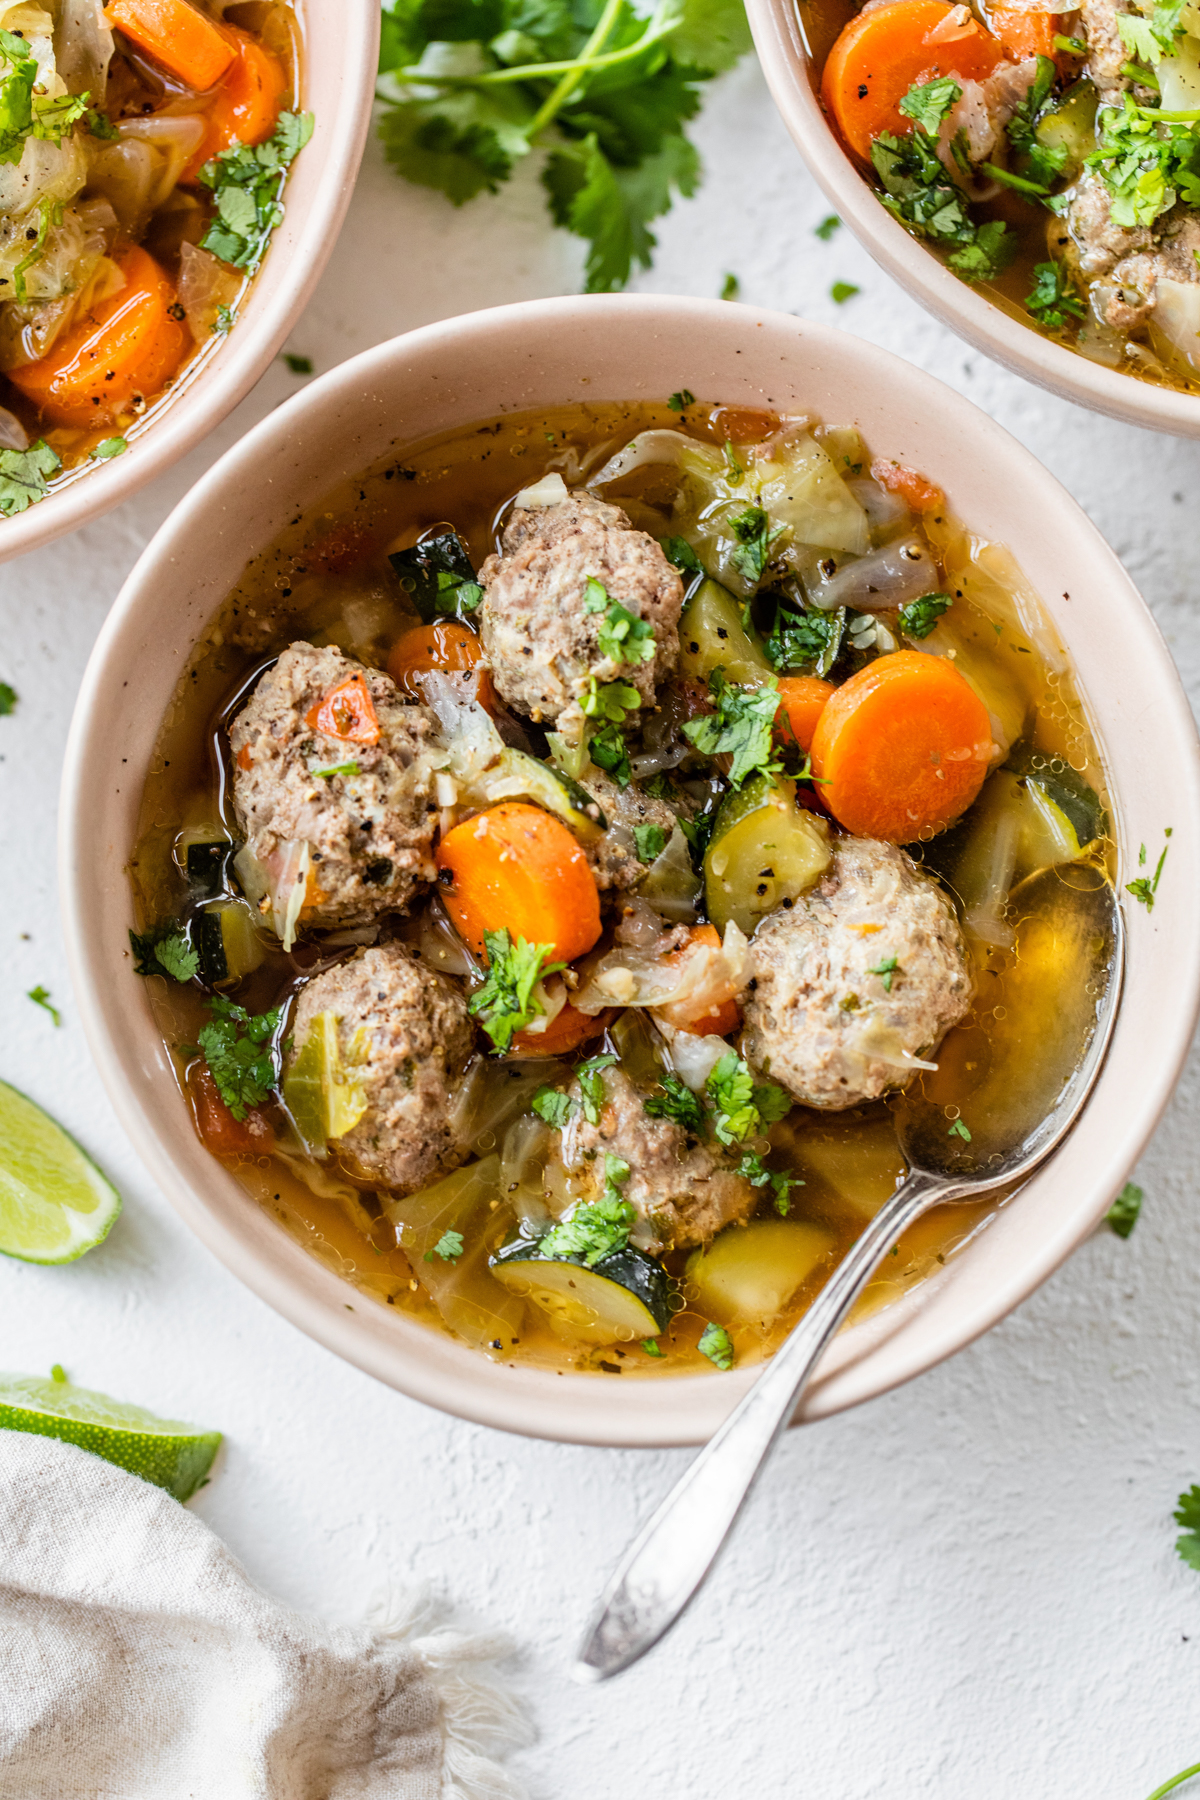 bowl of meatball and vegetable soup with cabbage, zucchini and carrots